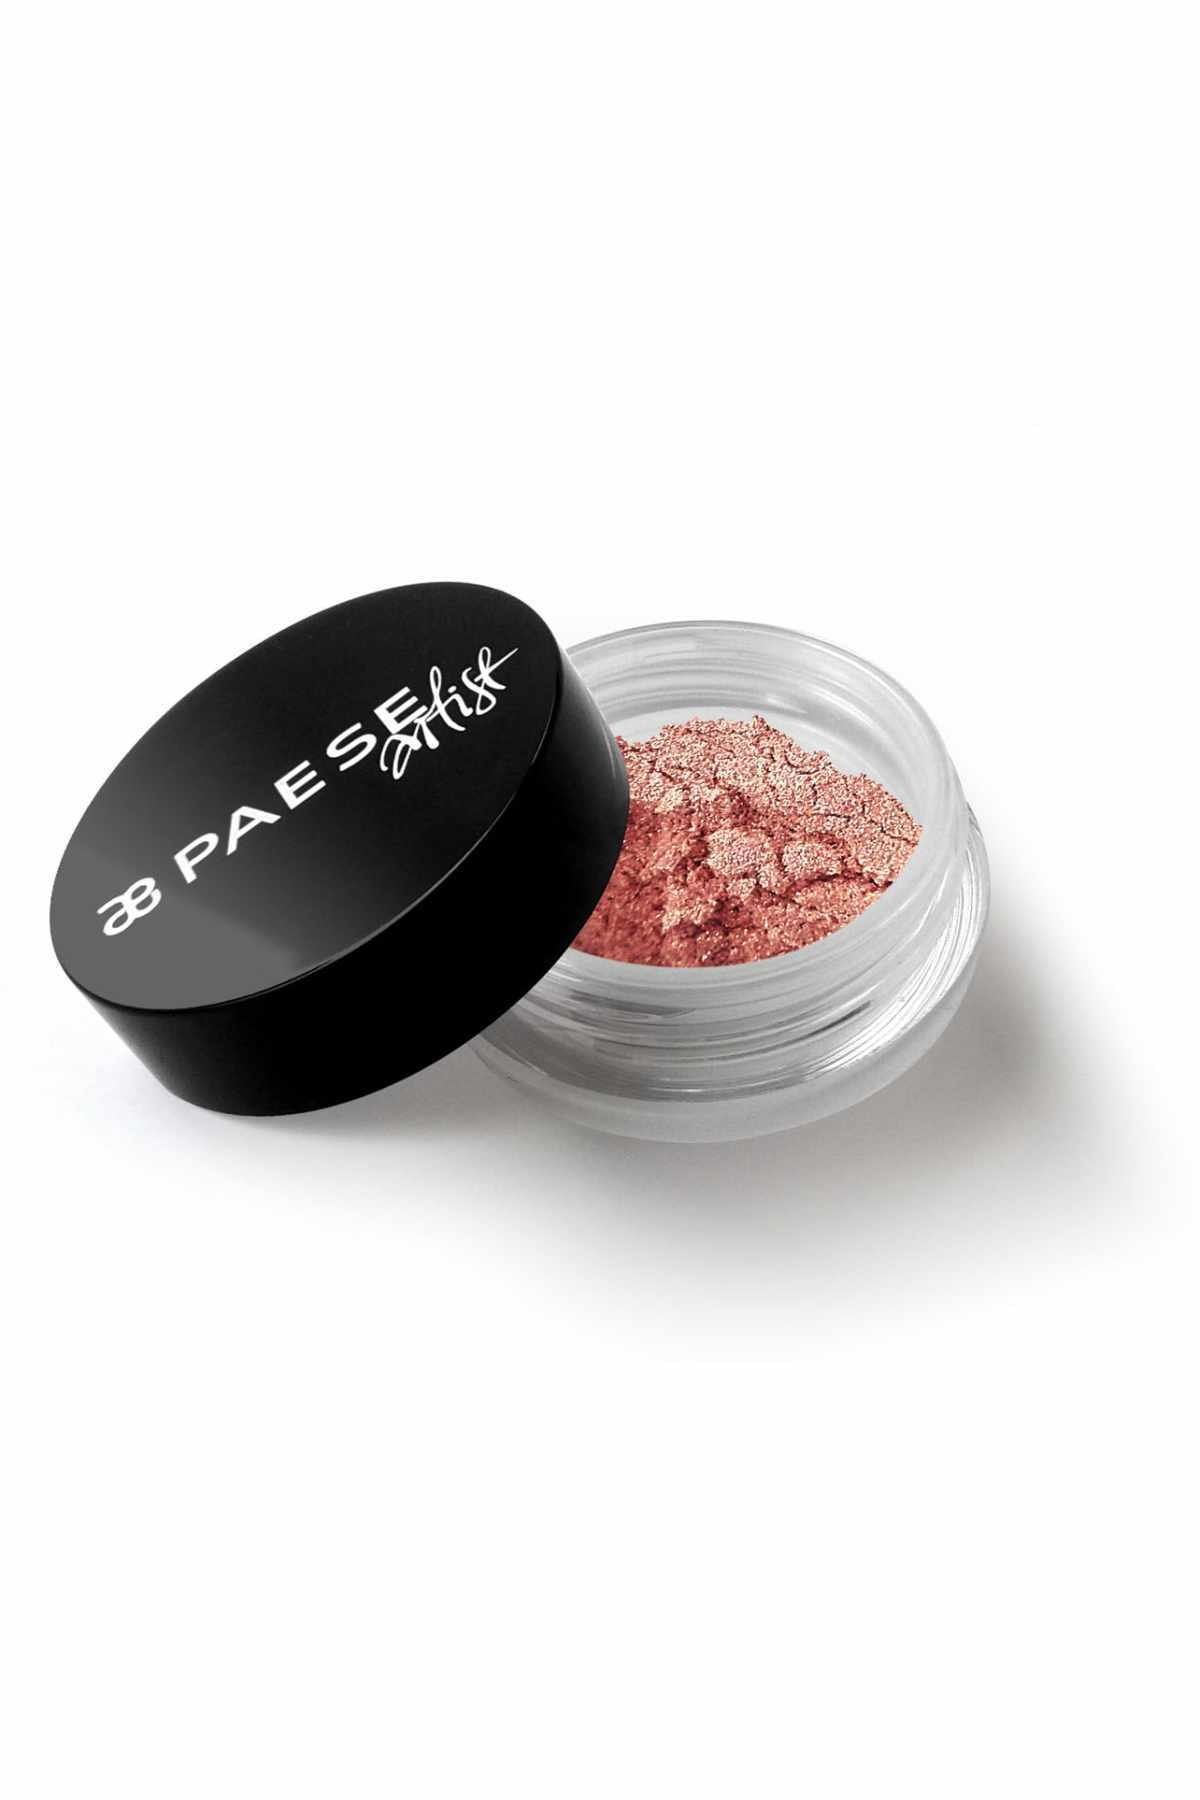 PAESE Pigment - Pure Pigments 03 Light Gold 5901698578268